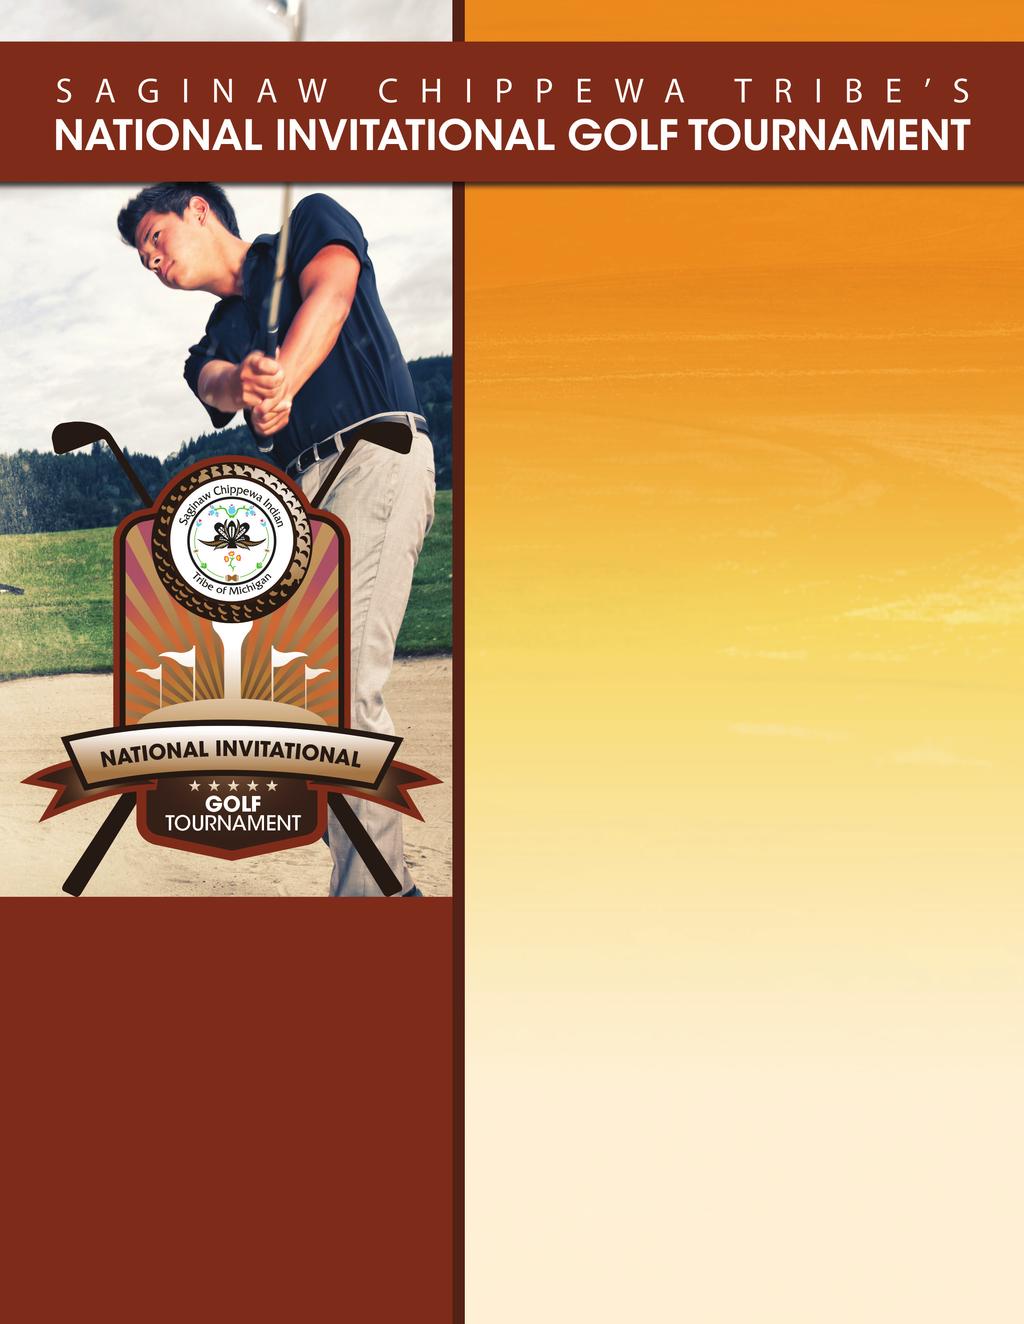 AUGUST 21-23, 2015 MOUNT PLEASANT, MICHIGAN Home of the Saginaw Chippewa Tribe owners and operators of the Soaring Eagle Casino & Resort, Soaring Eagle Water Park and Waabooz Run Golf Course Seniors